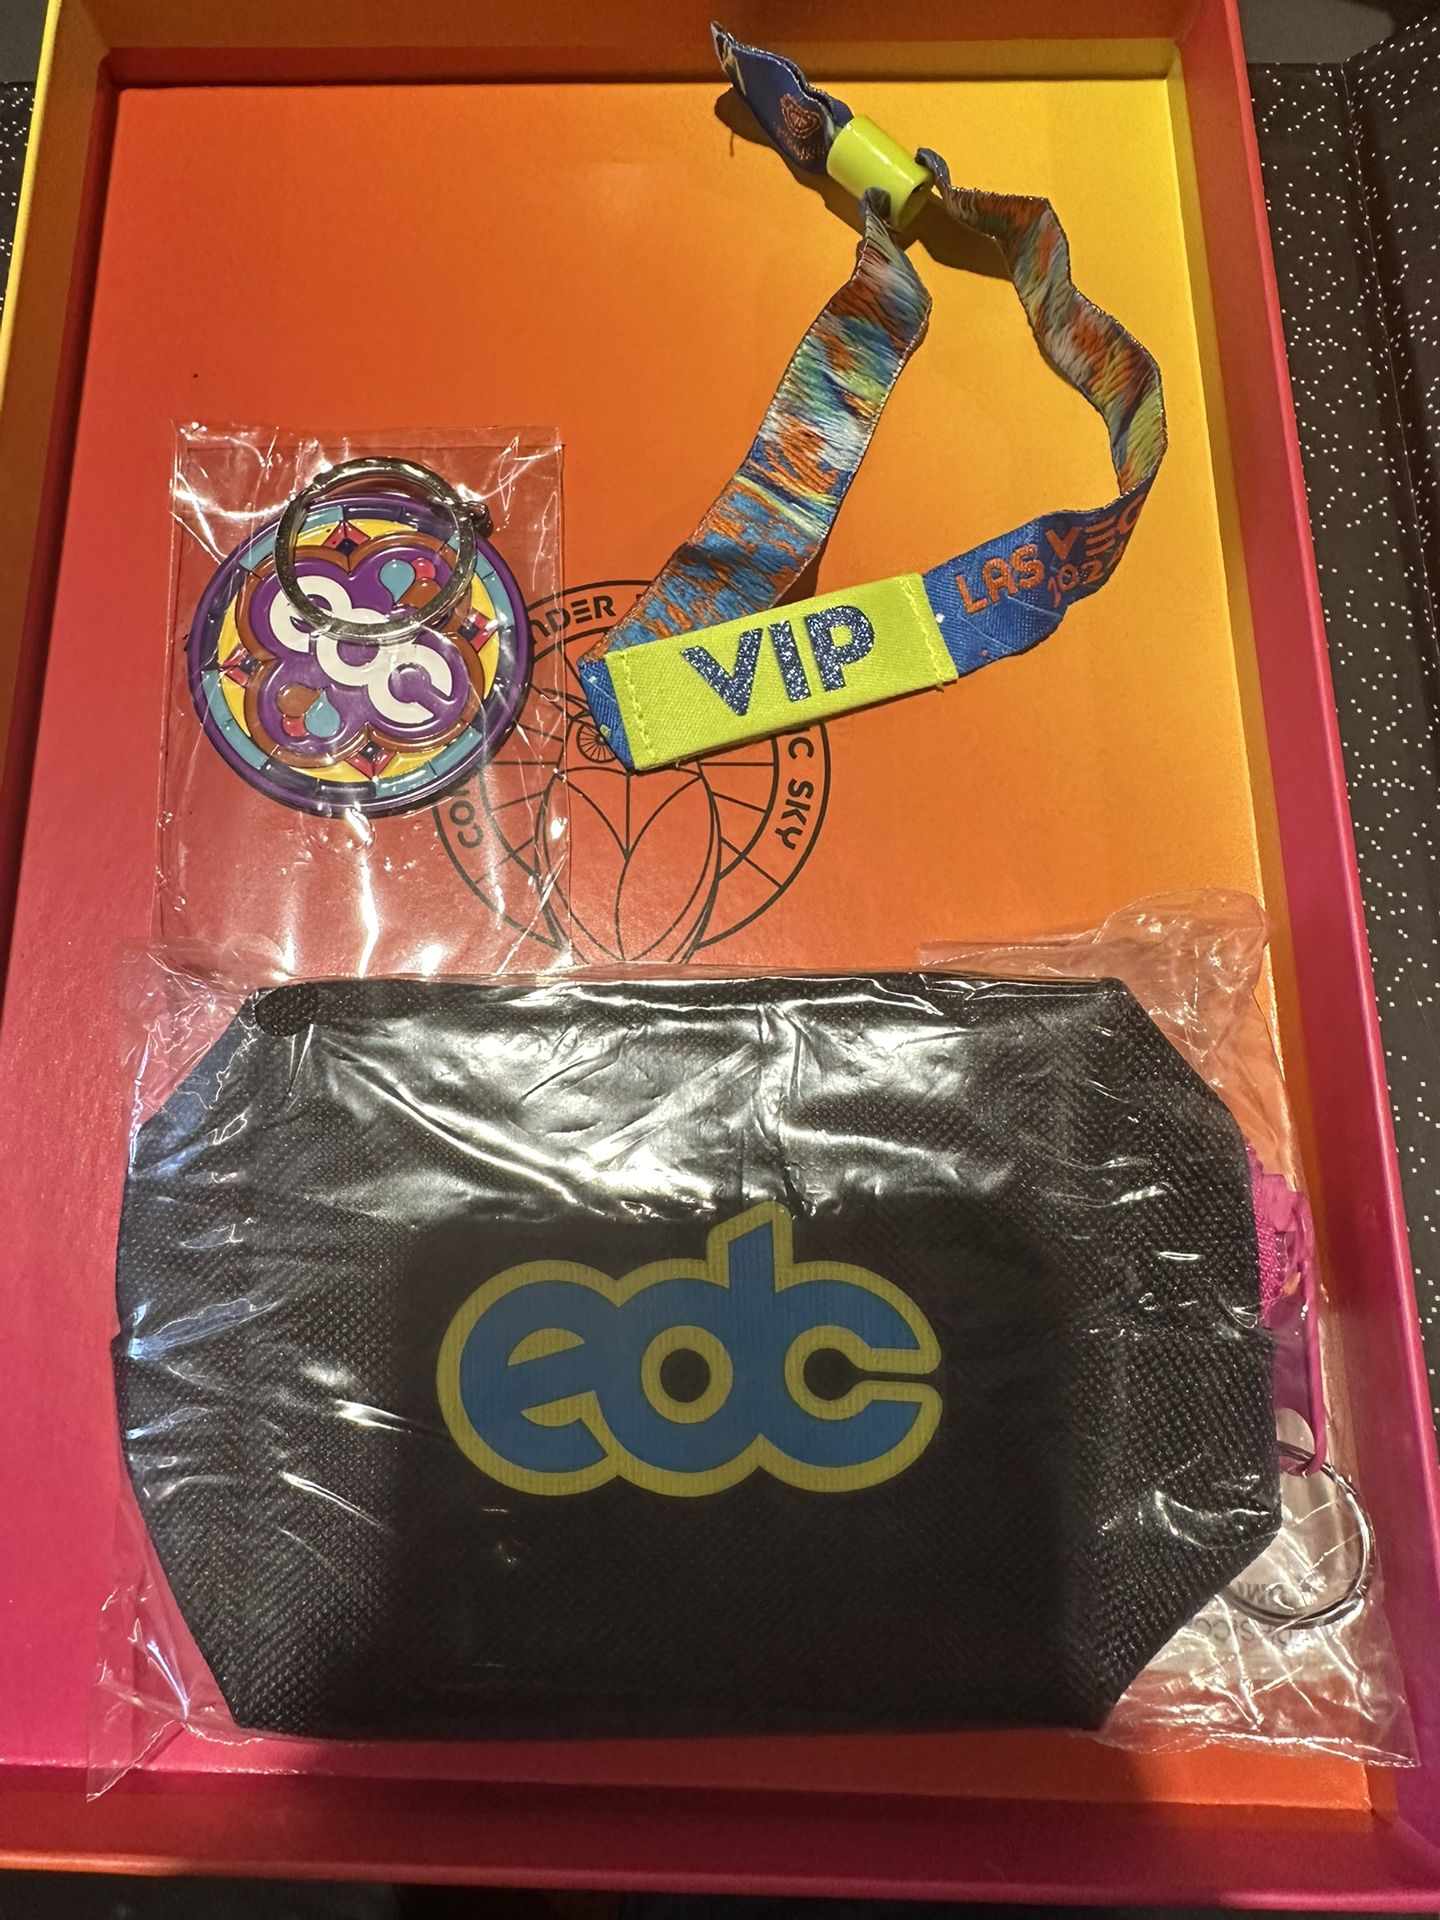 EDC 3 Day Pass VIP - Box & Charm Included